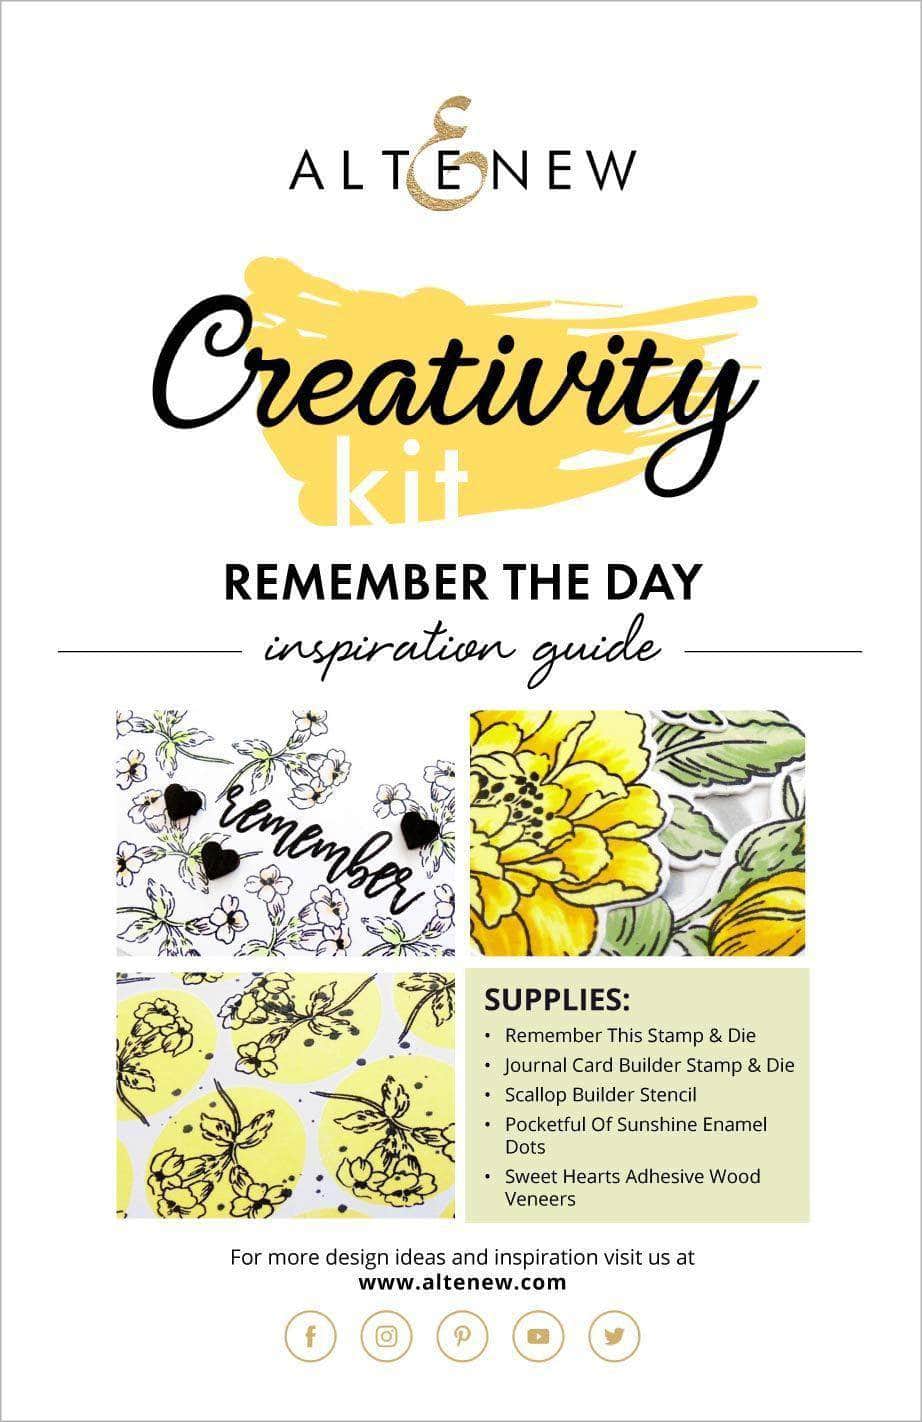 Printed Media Remember The Day Creativity Kit Inspiration Guide